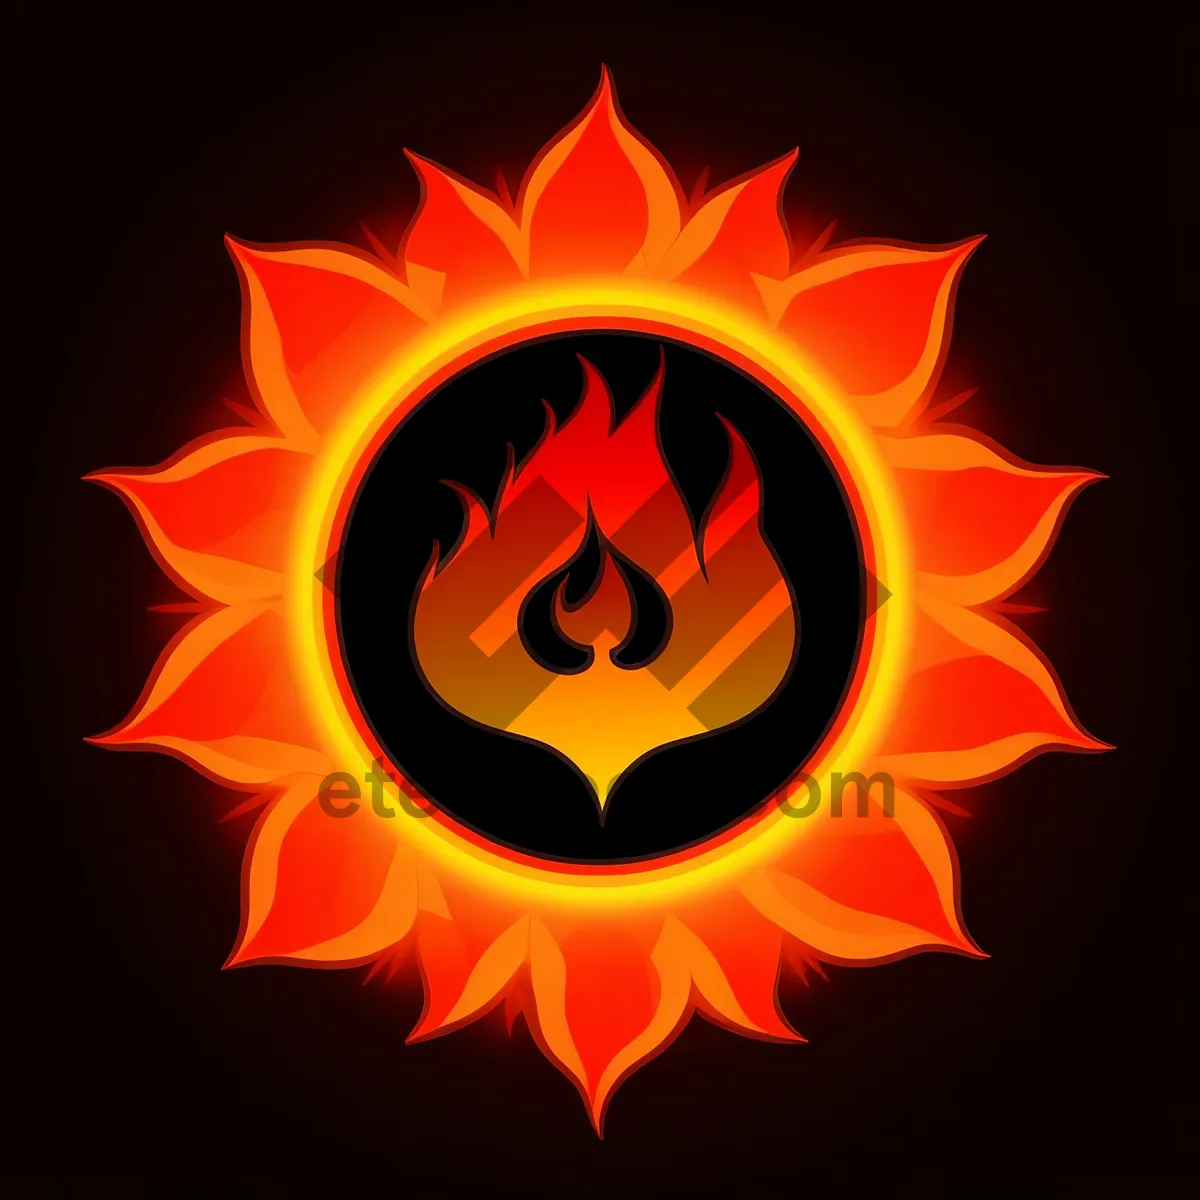 Picture of Fiery Sun Heraldry Icon in Graphic Design